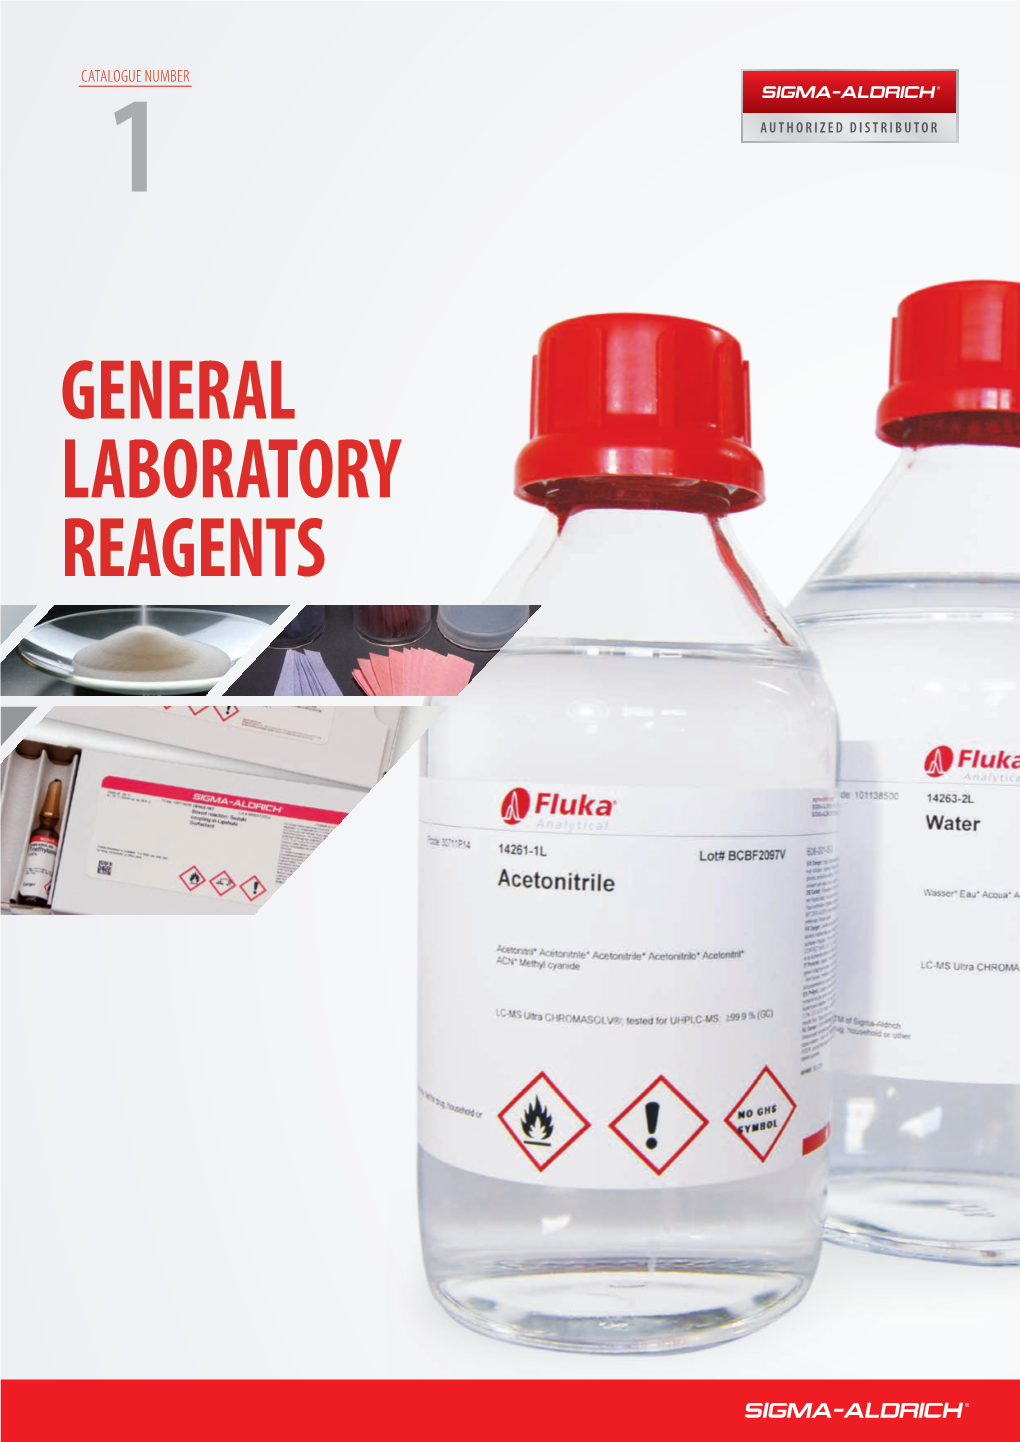 GENERAL LABORATORY REAGENTS Table of Contents